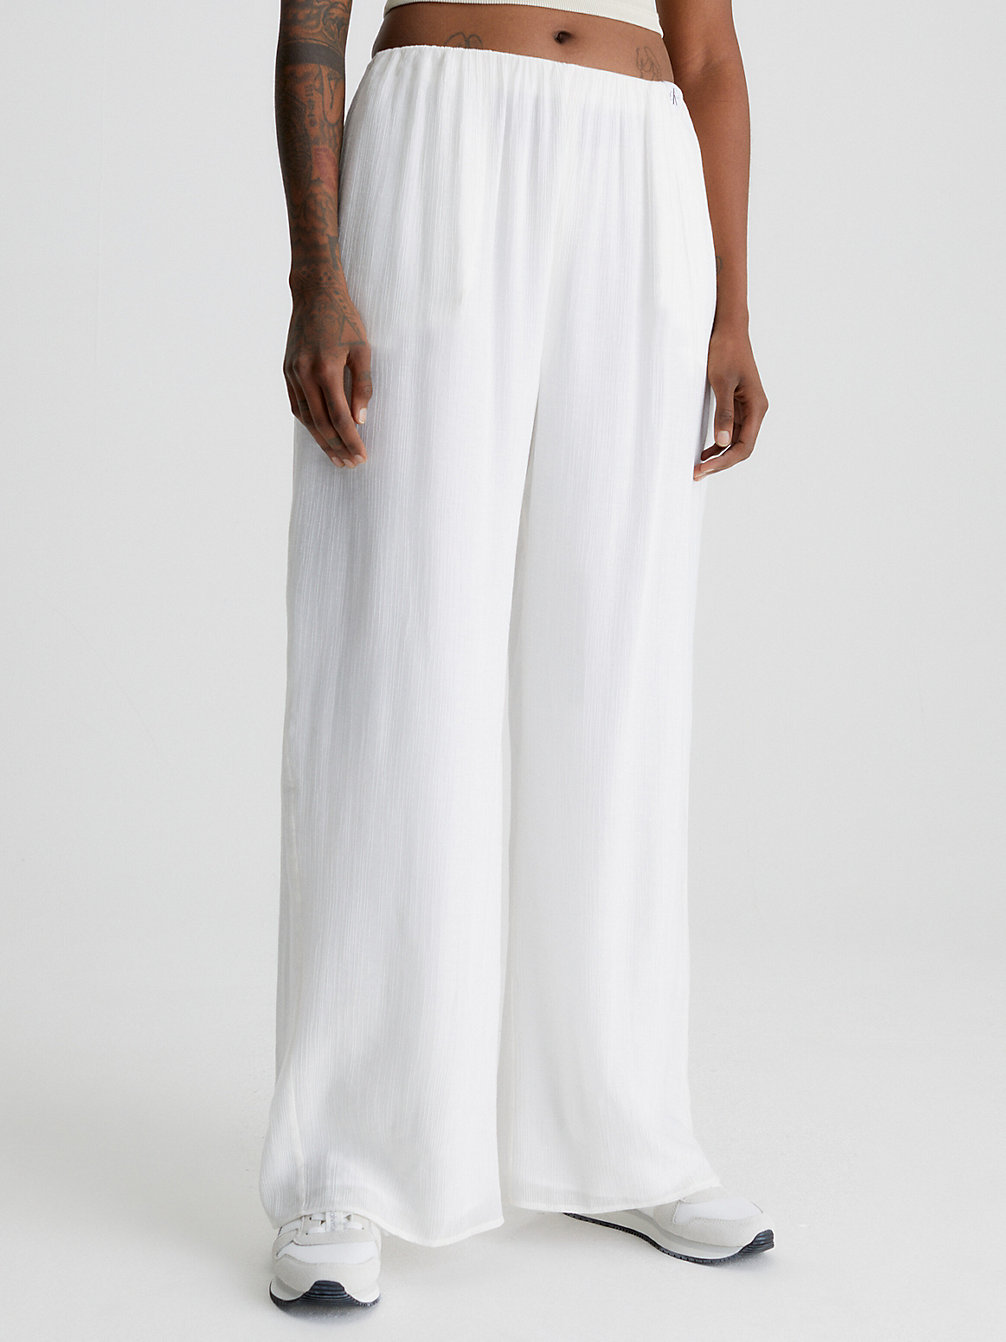 ANCIENT WHITE Crinkle Rayon Wide Leg Trousers undefined women Calvin Klein